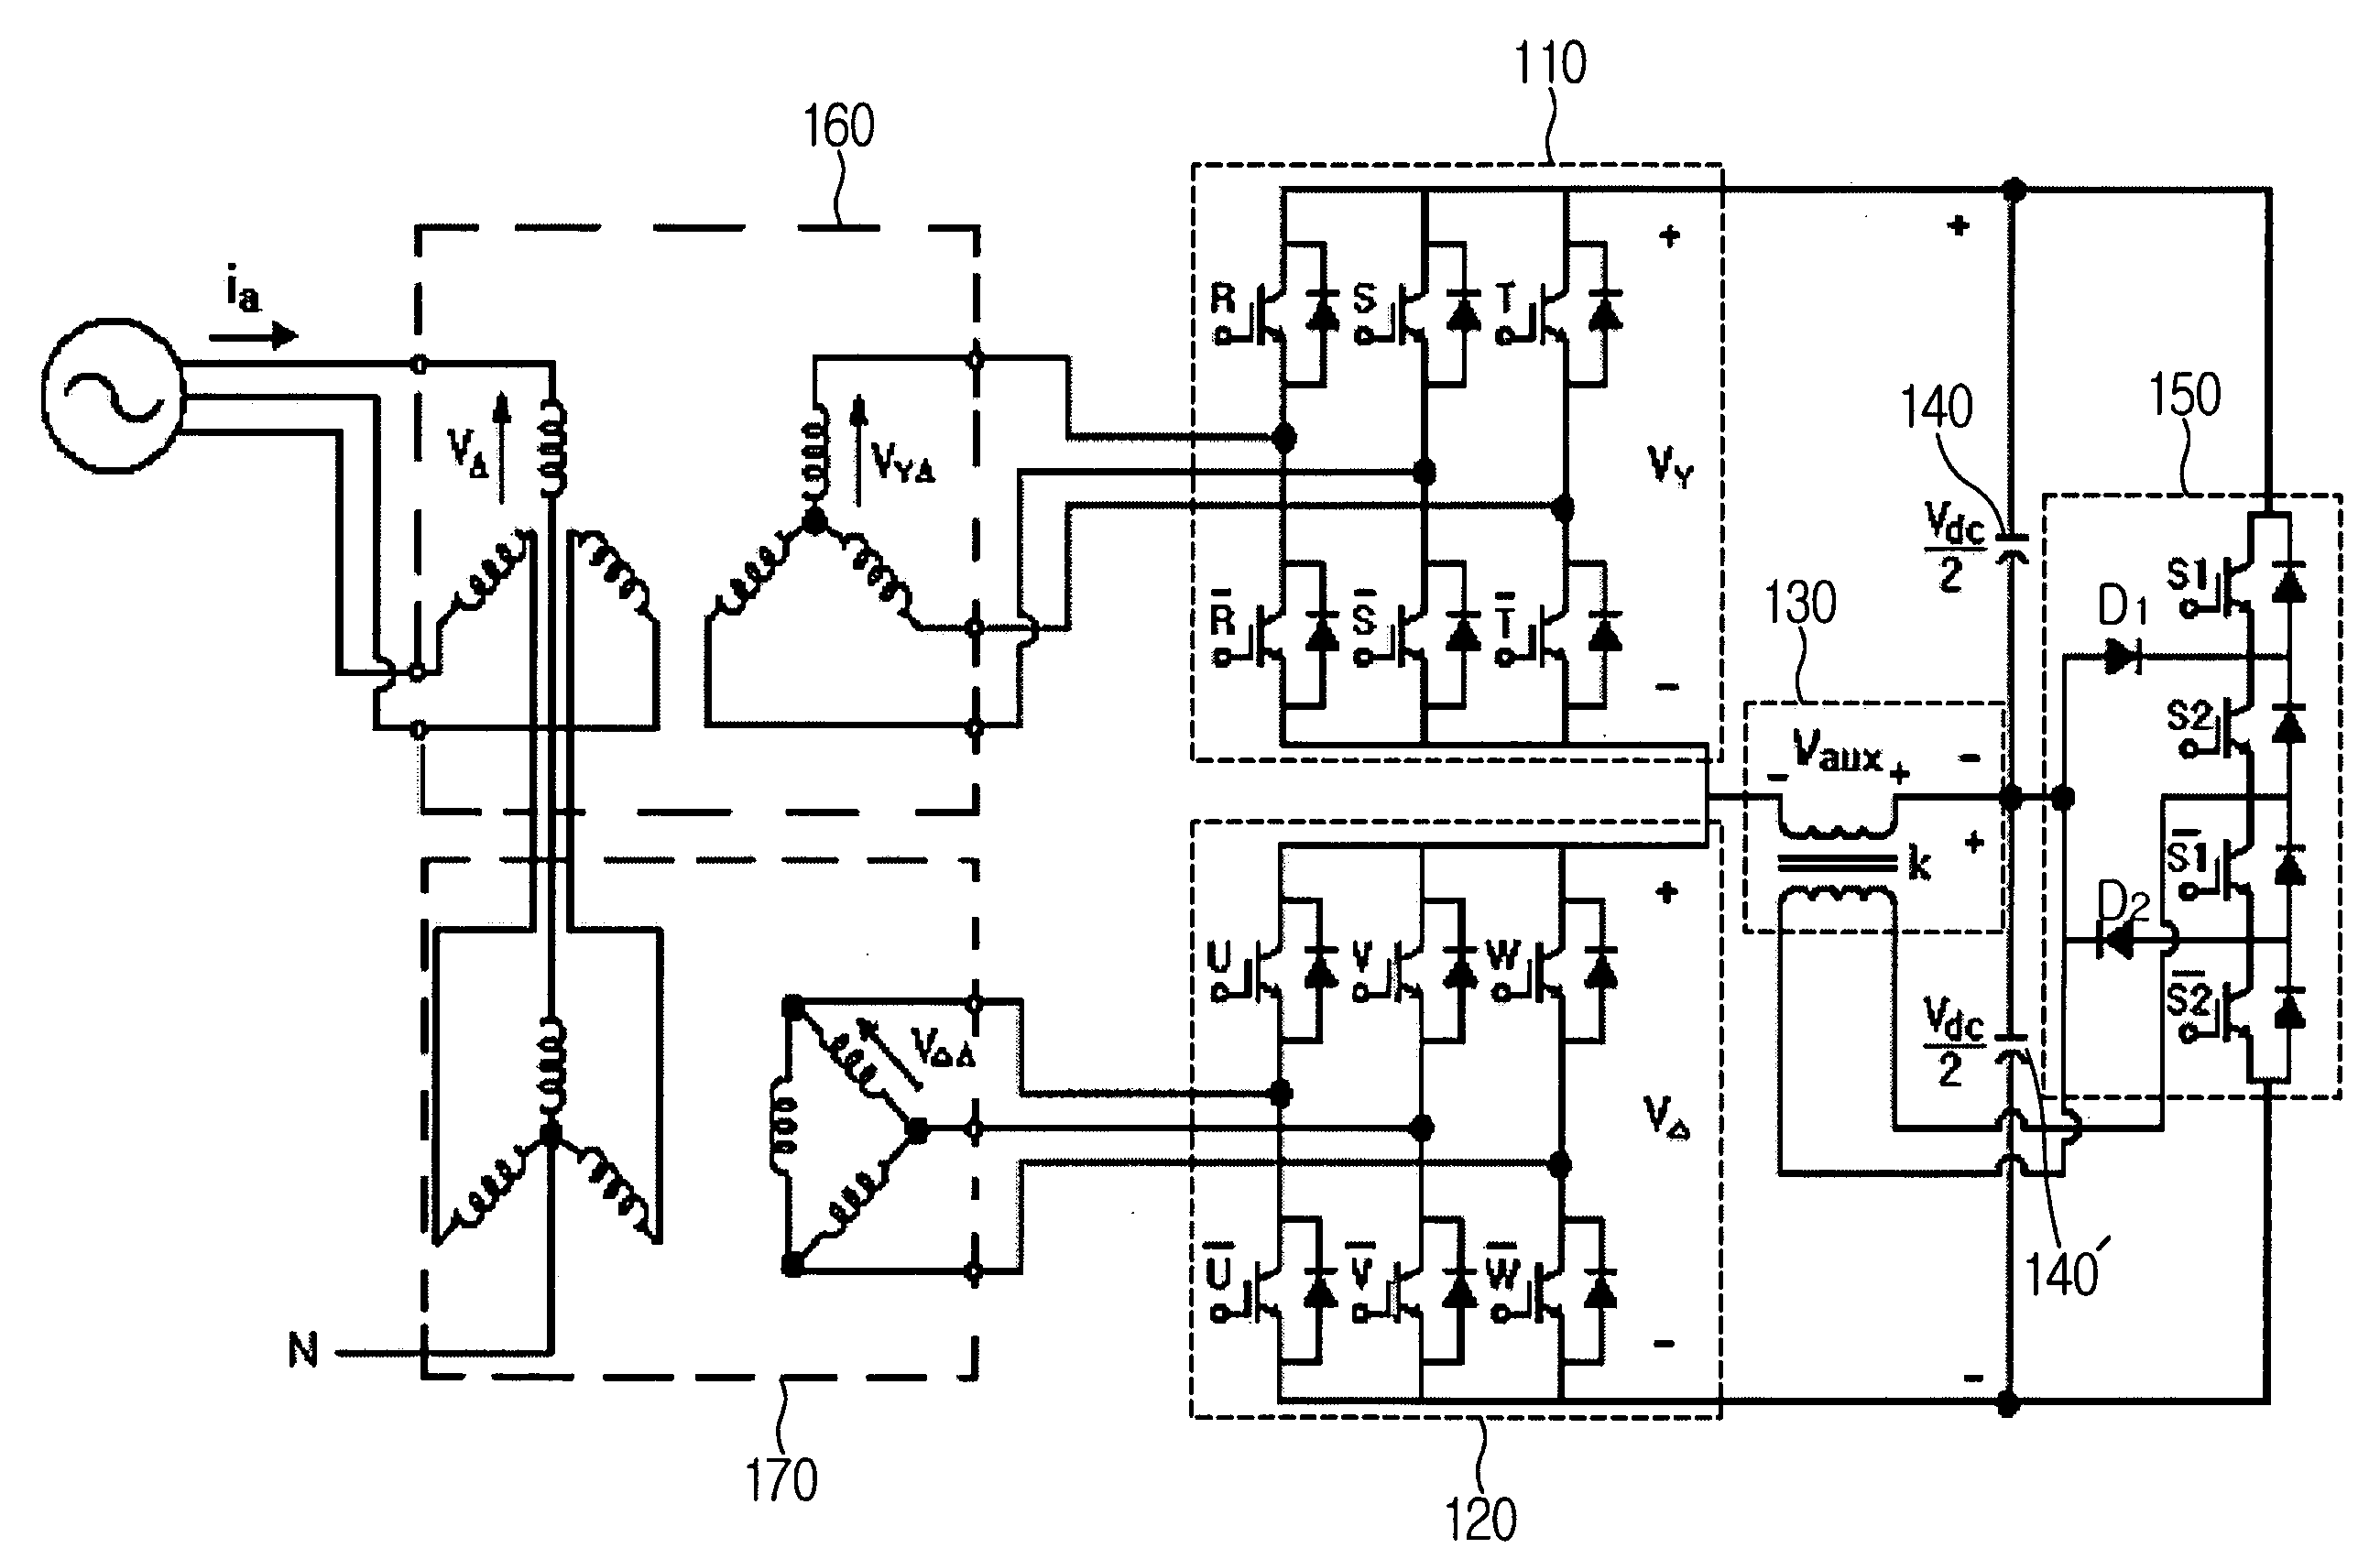 DC power transmisson system of voltage source converter using pulse-interleaving auxiliary circuit